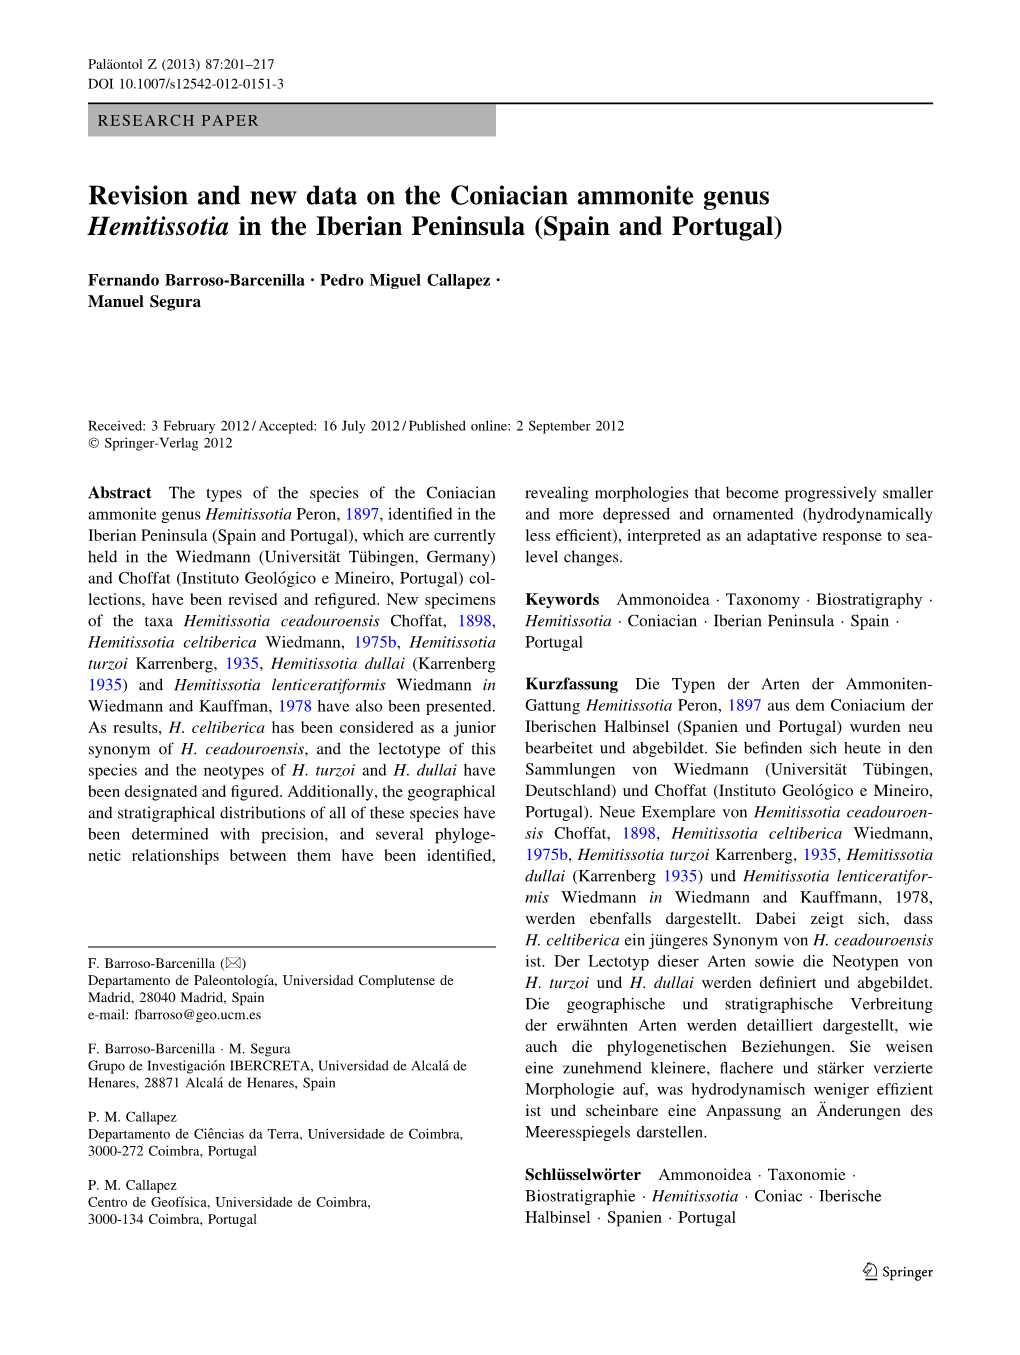 Revision and New Data on the Coniacian Ammonite Genus Hemitissotia in the Iberian Peninsula (Spain and Portugal)